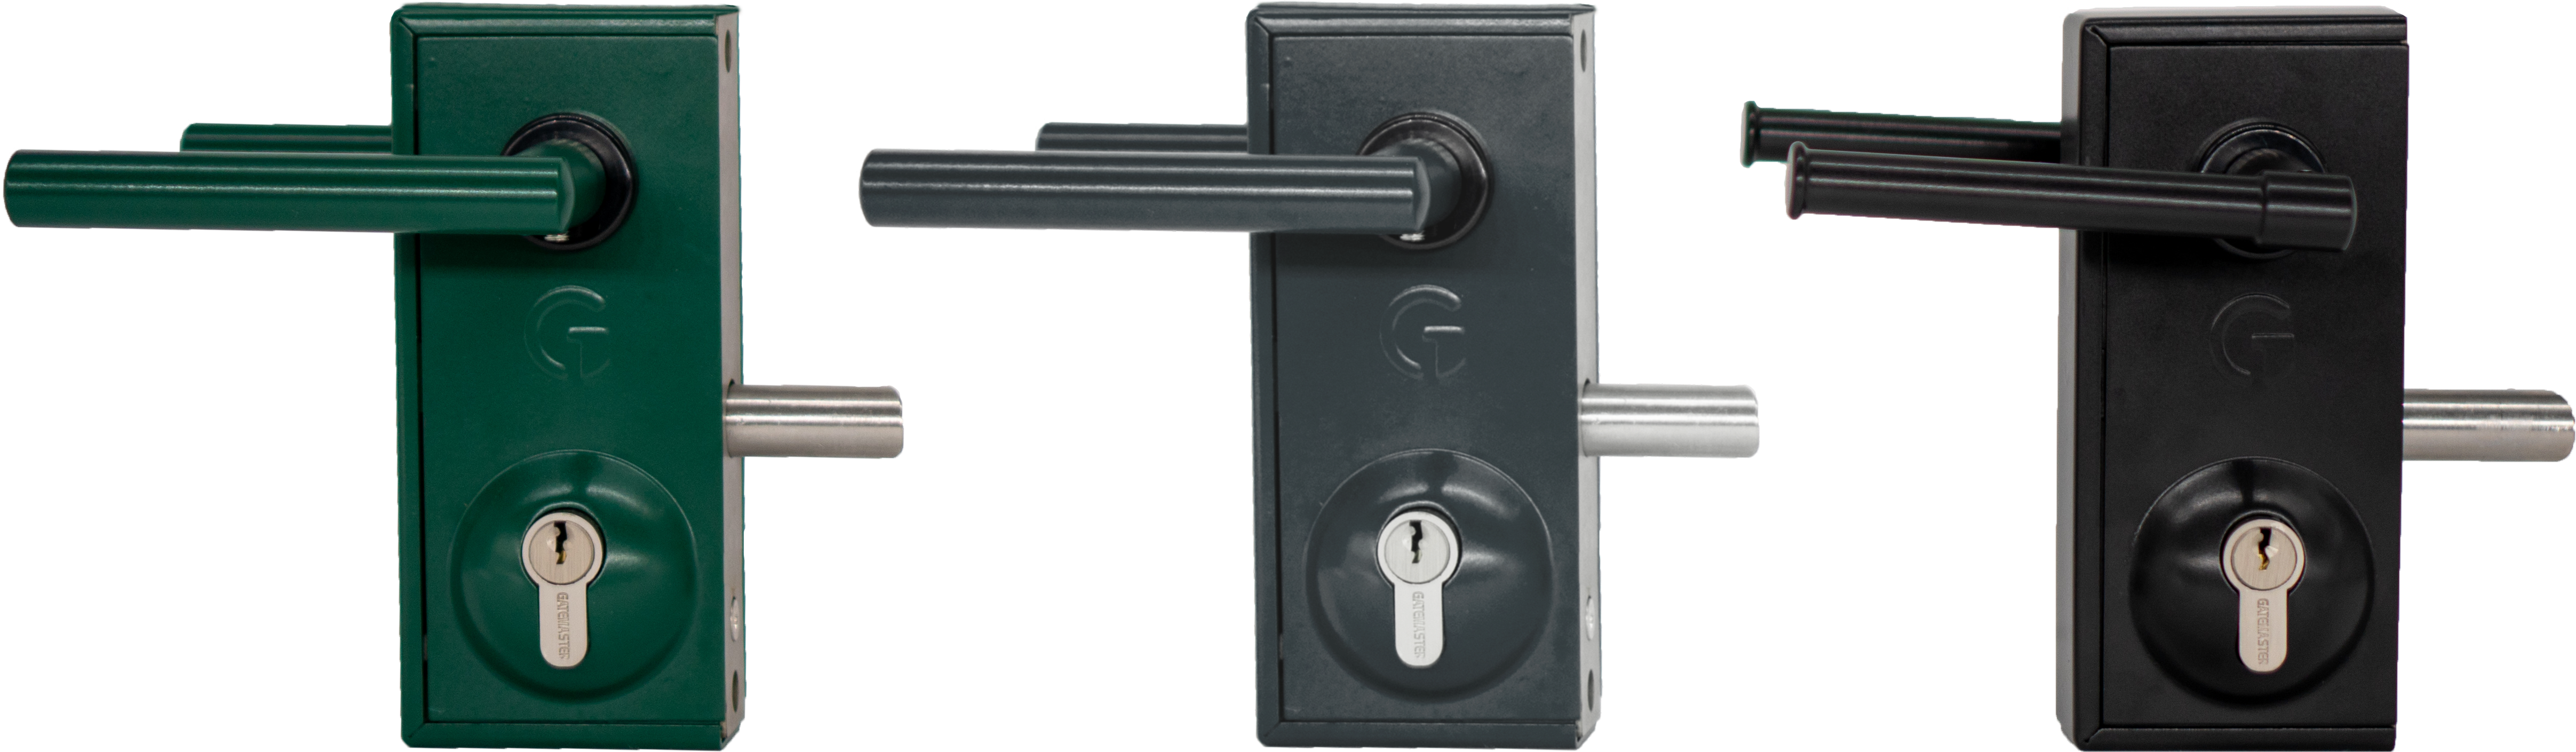 Three locks with key access. From left: green powder coated, grey powder coated and black powder coated stainless steel locks